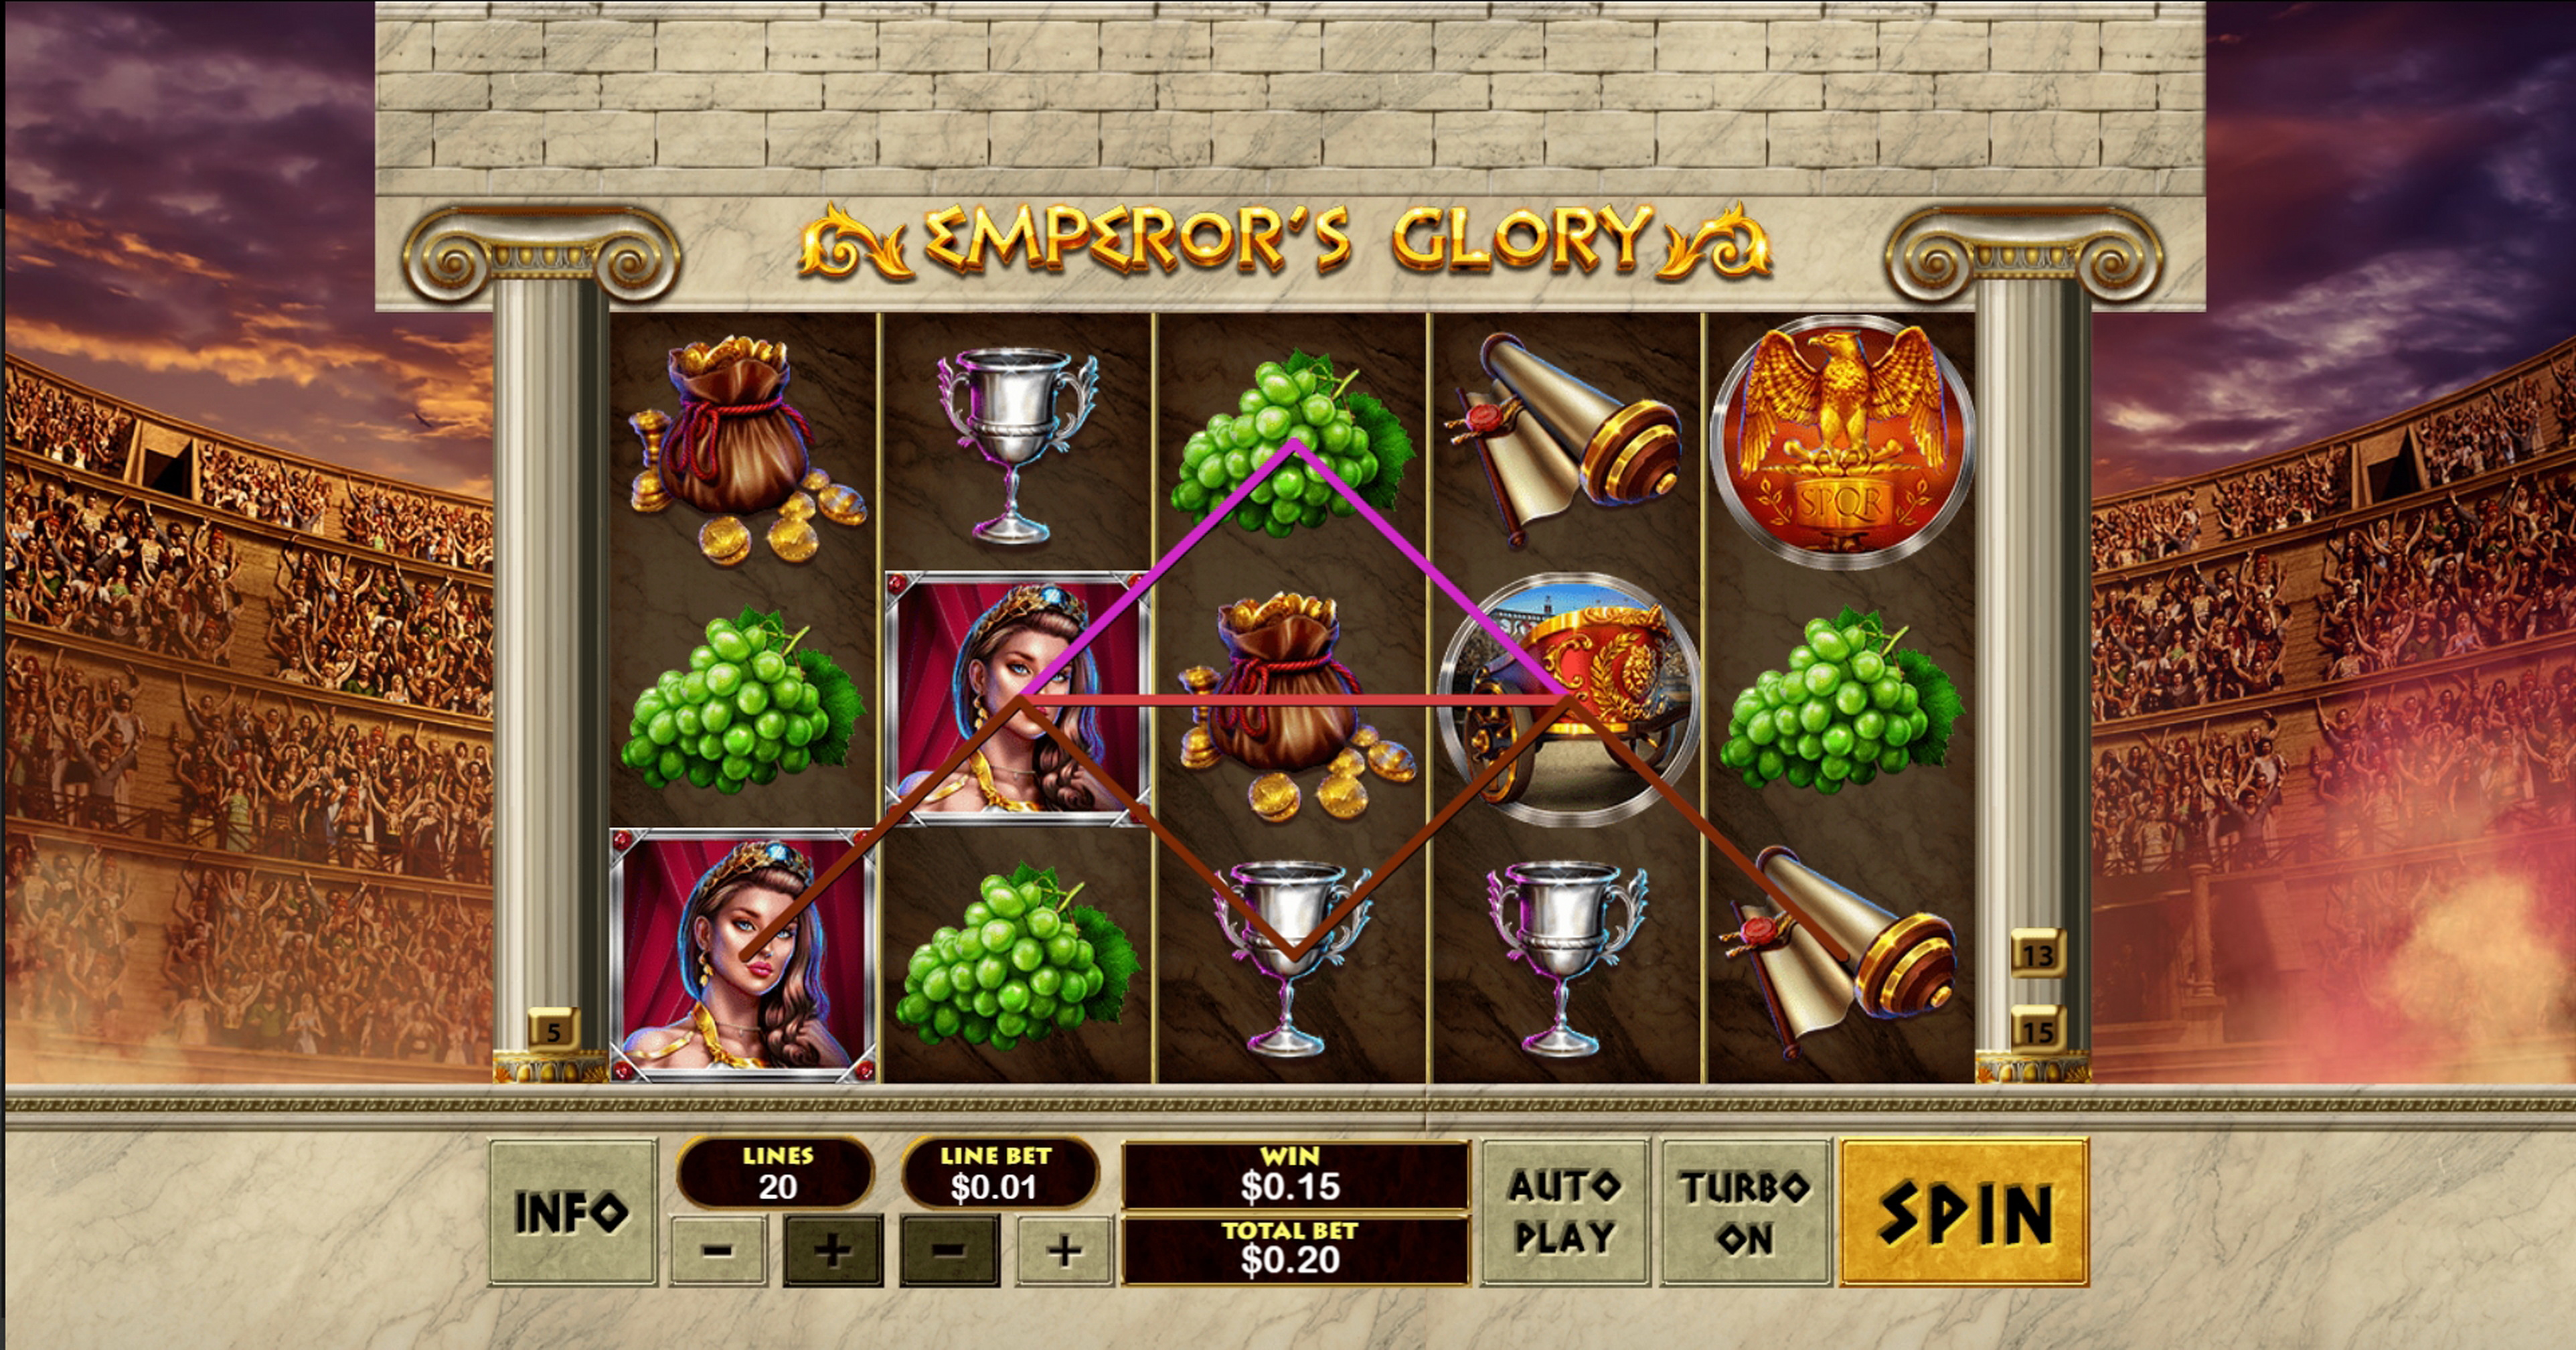 Win Money in Emperors Glory Free Slot Game by Xplosive Slots Group